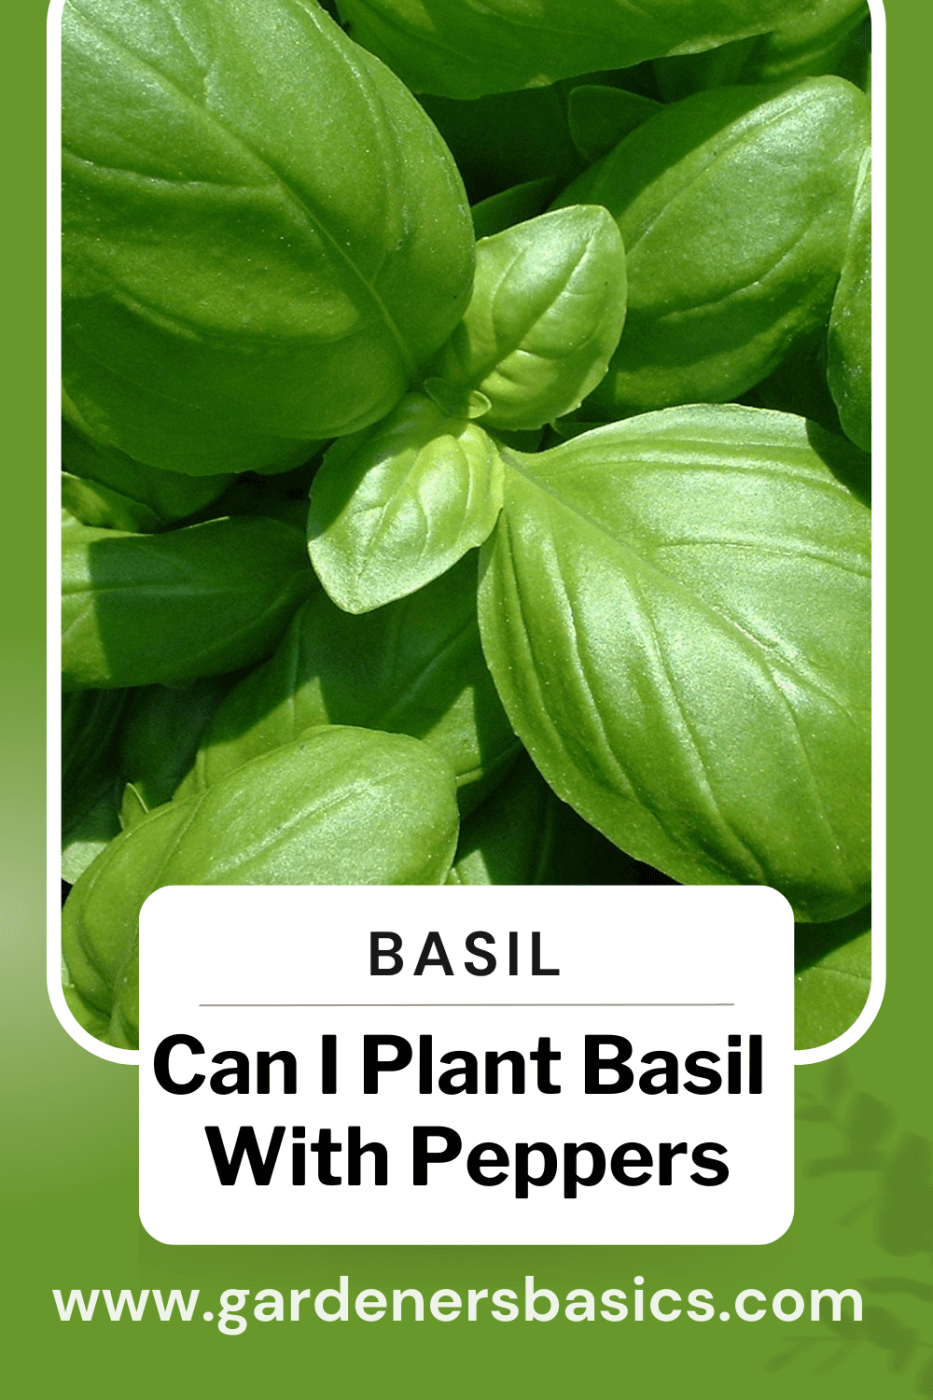 can I plant basil with peppers